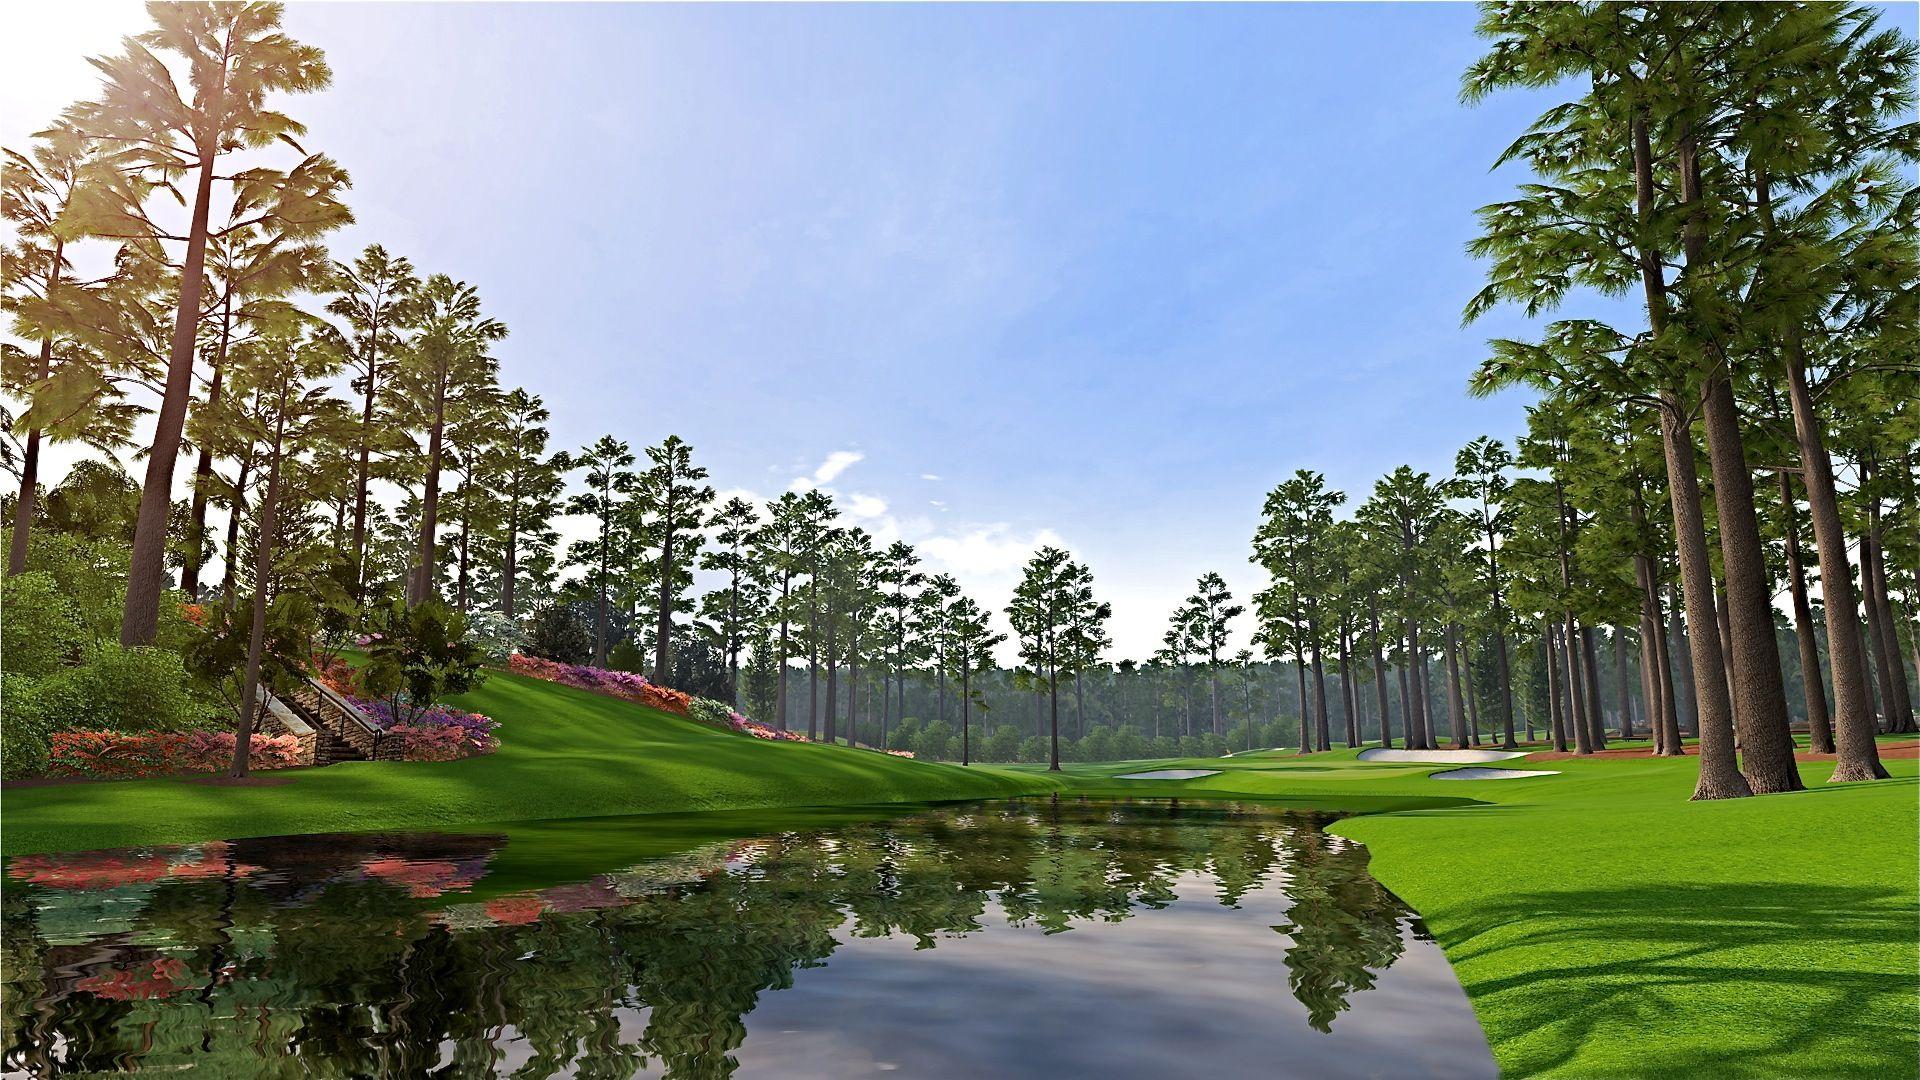 Augusta National hole. Just beautiful. #golf #landscapes